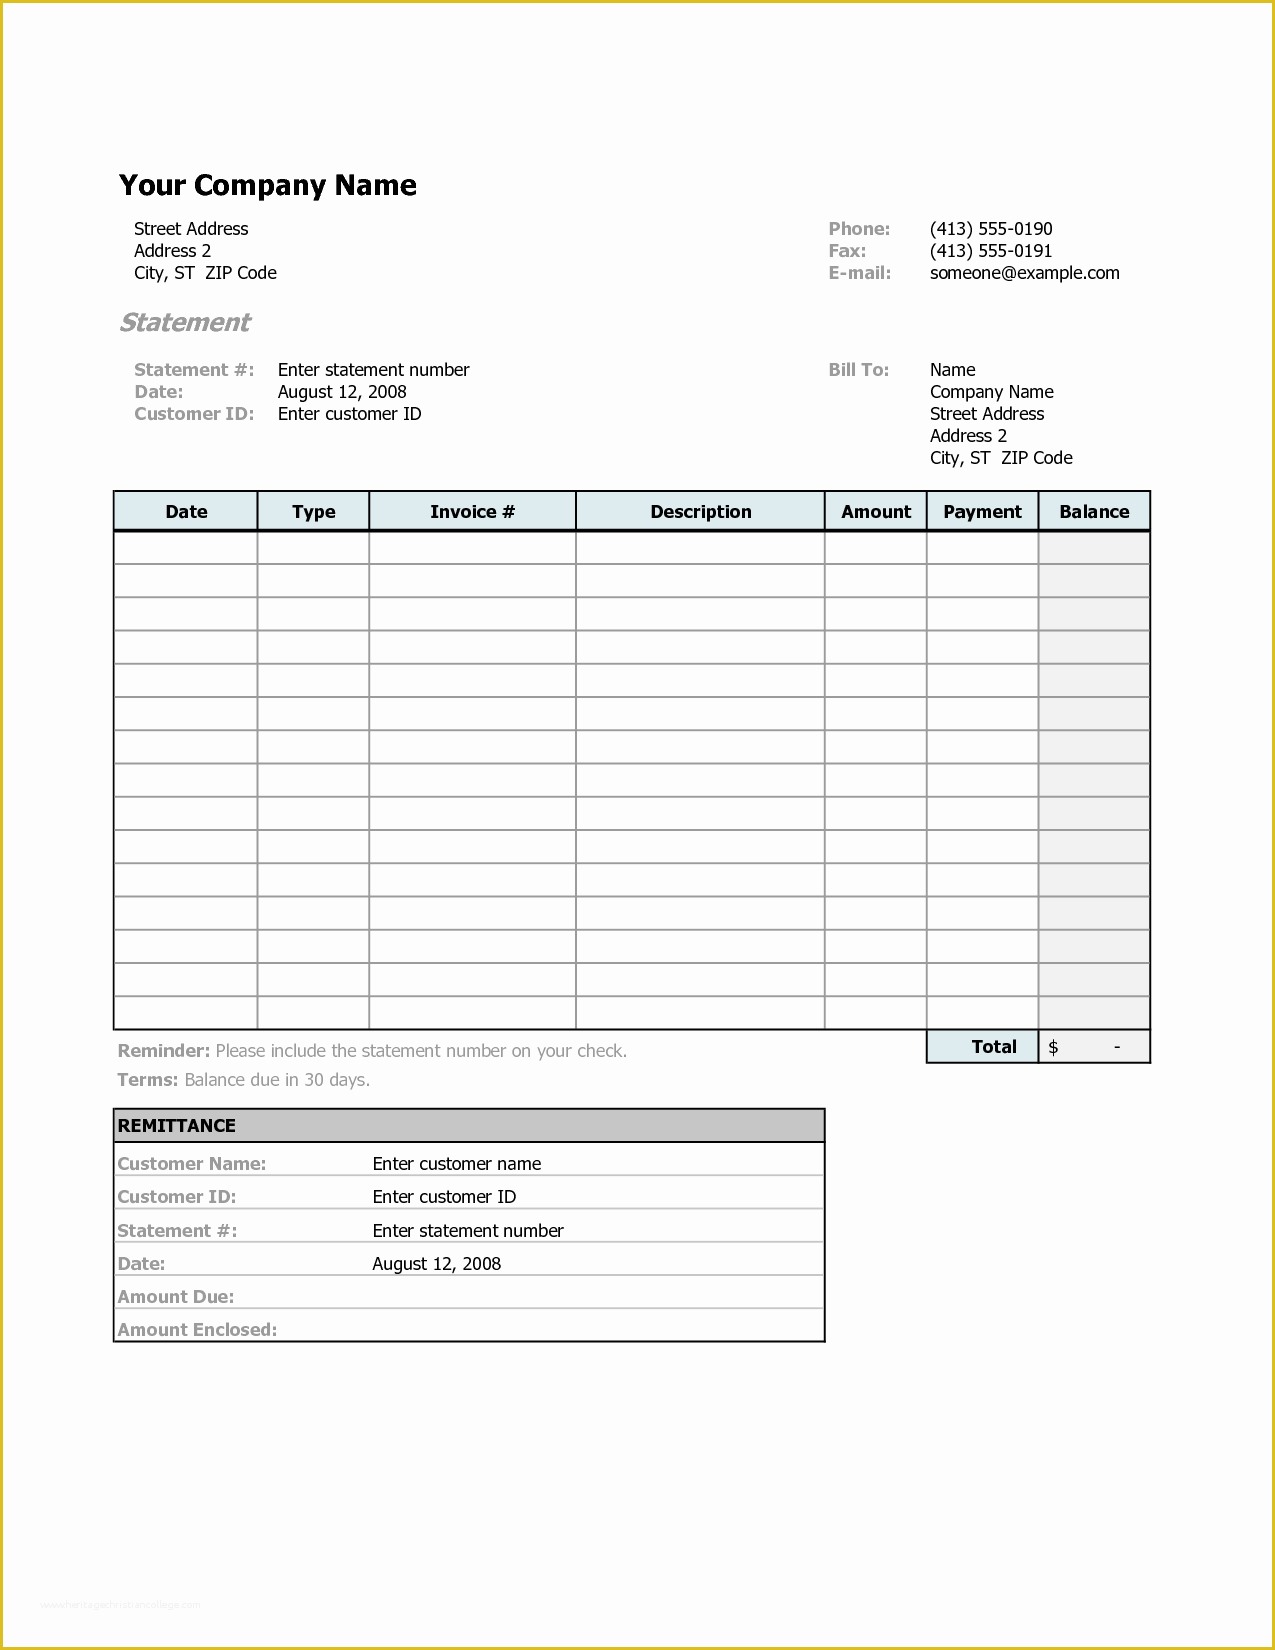 Free Printable Billing Statement Template Of Free Printable Billing Statement Excel Template for Your